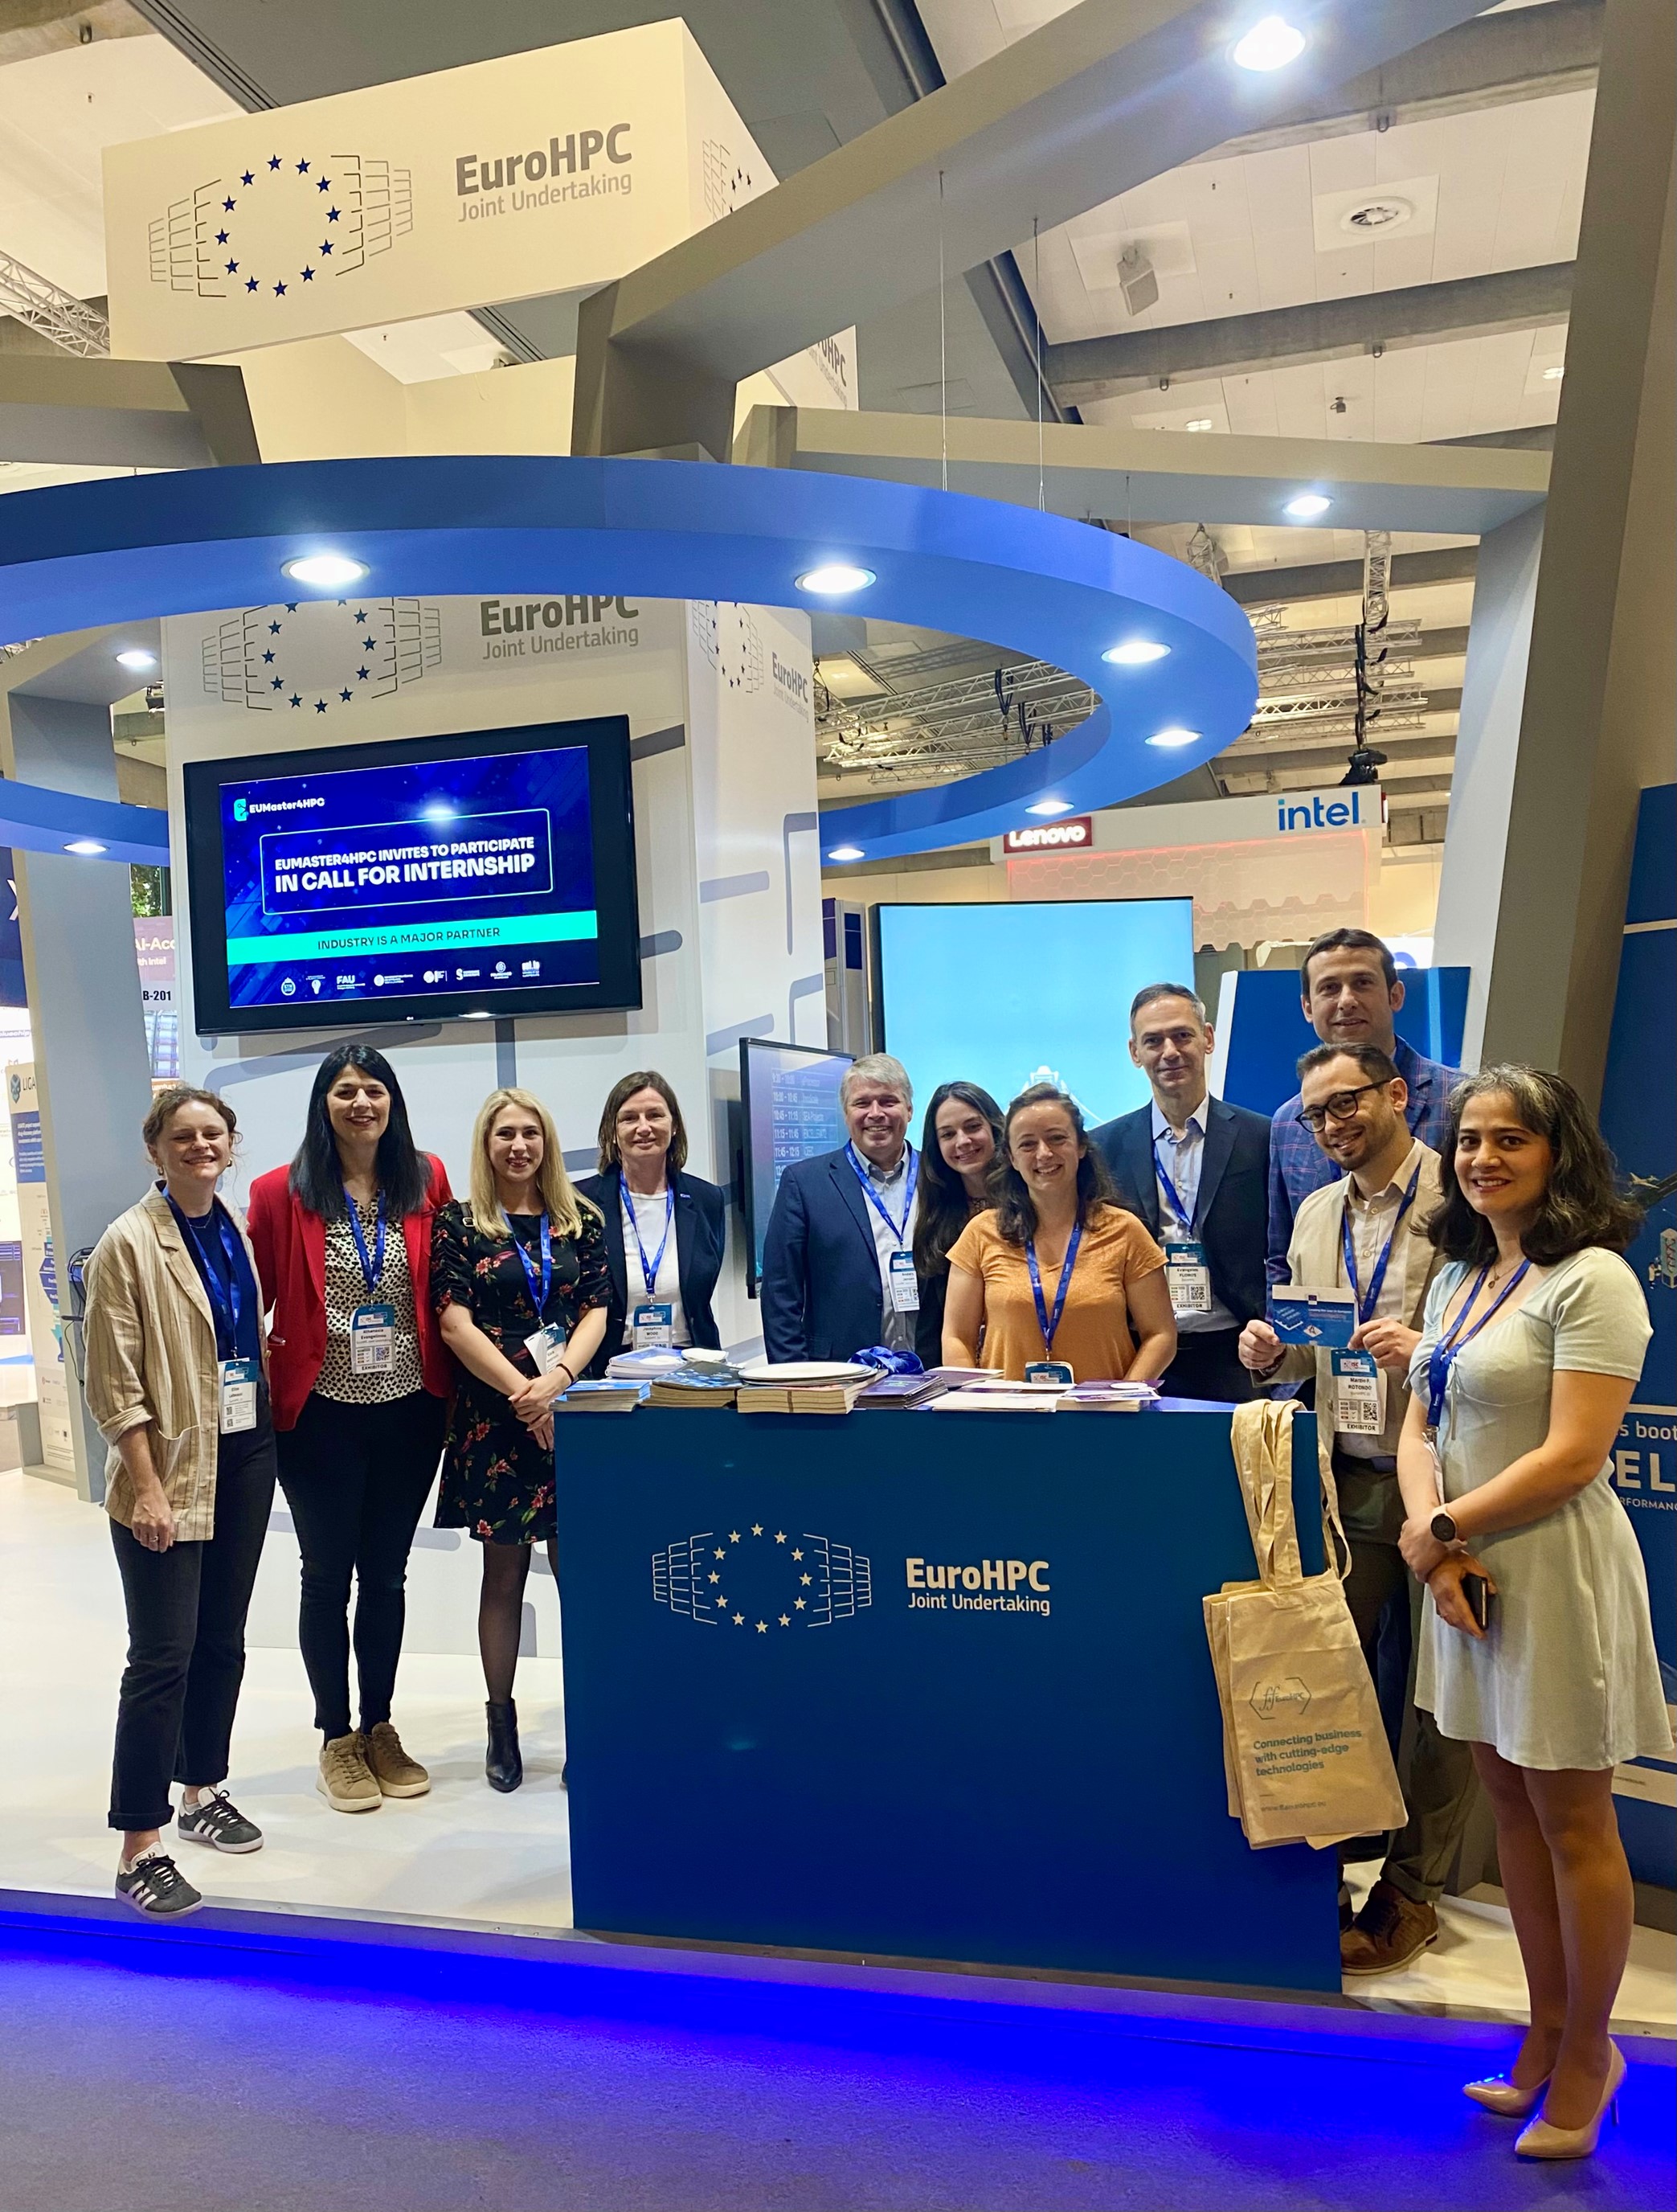 The EuroHPC team ready to welcome visitors to the stand